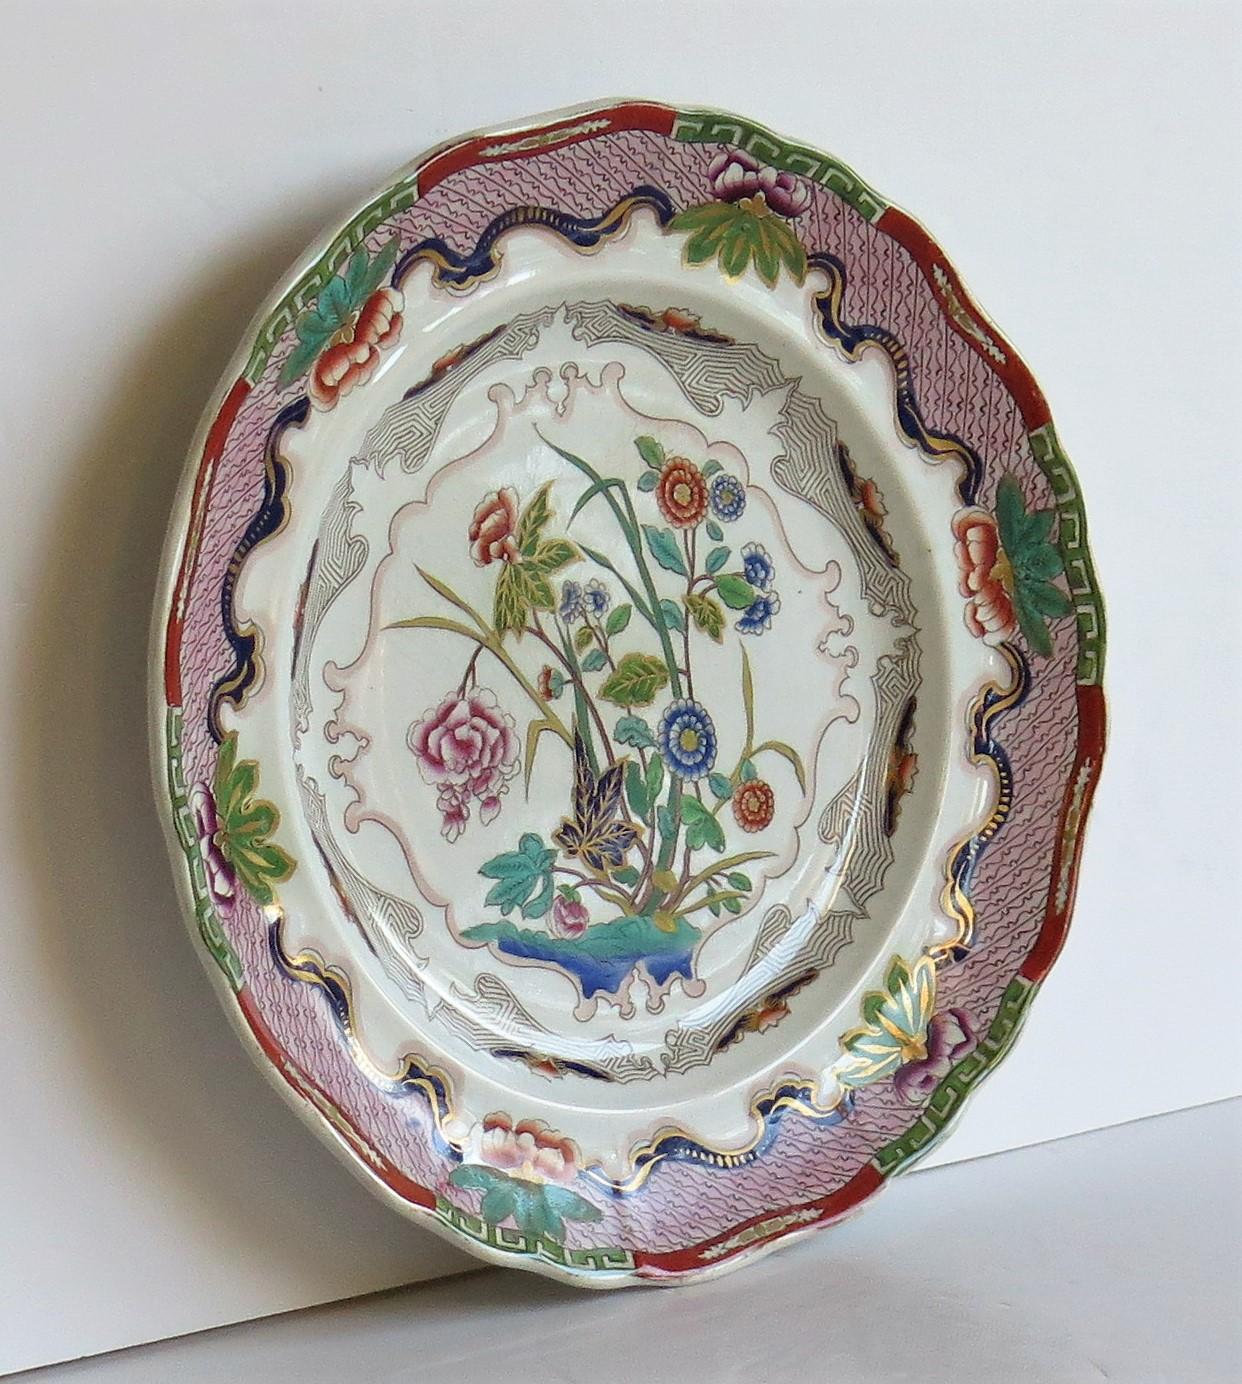 Hand-Painted Charles Meigh Ironstone Plate Hand Painted Floral Pattern No. 422, circa 1840